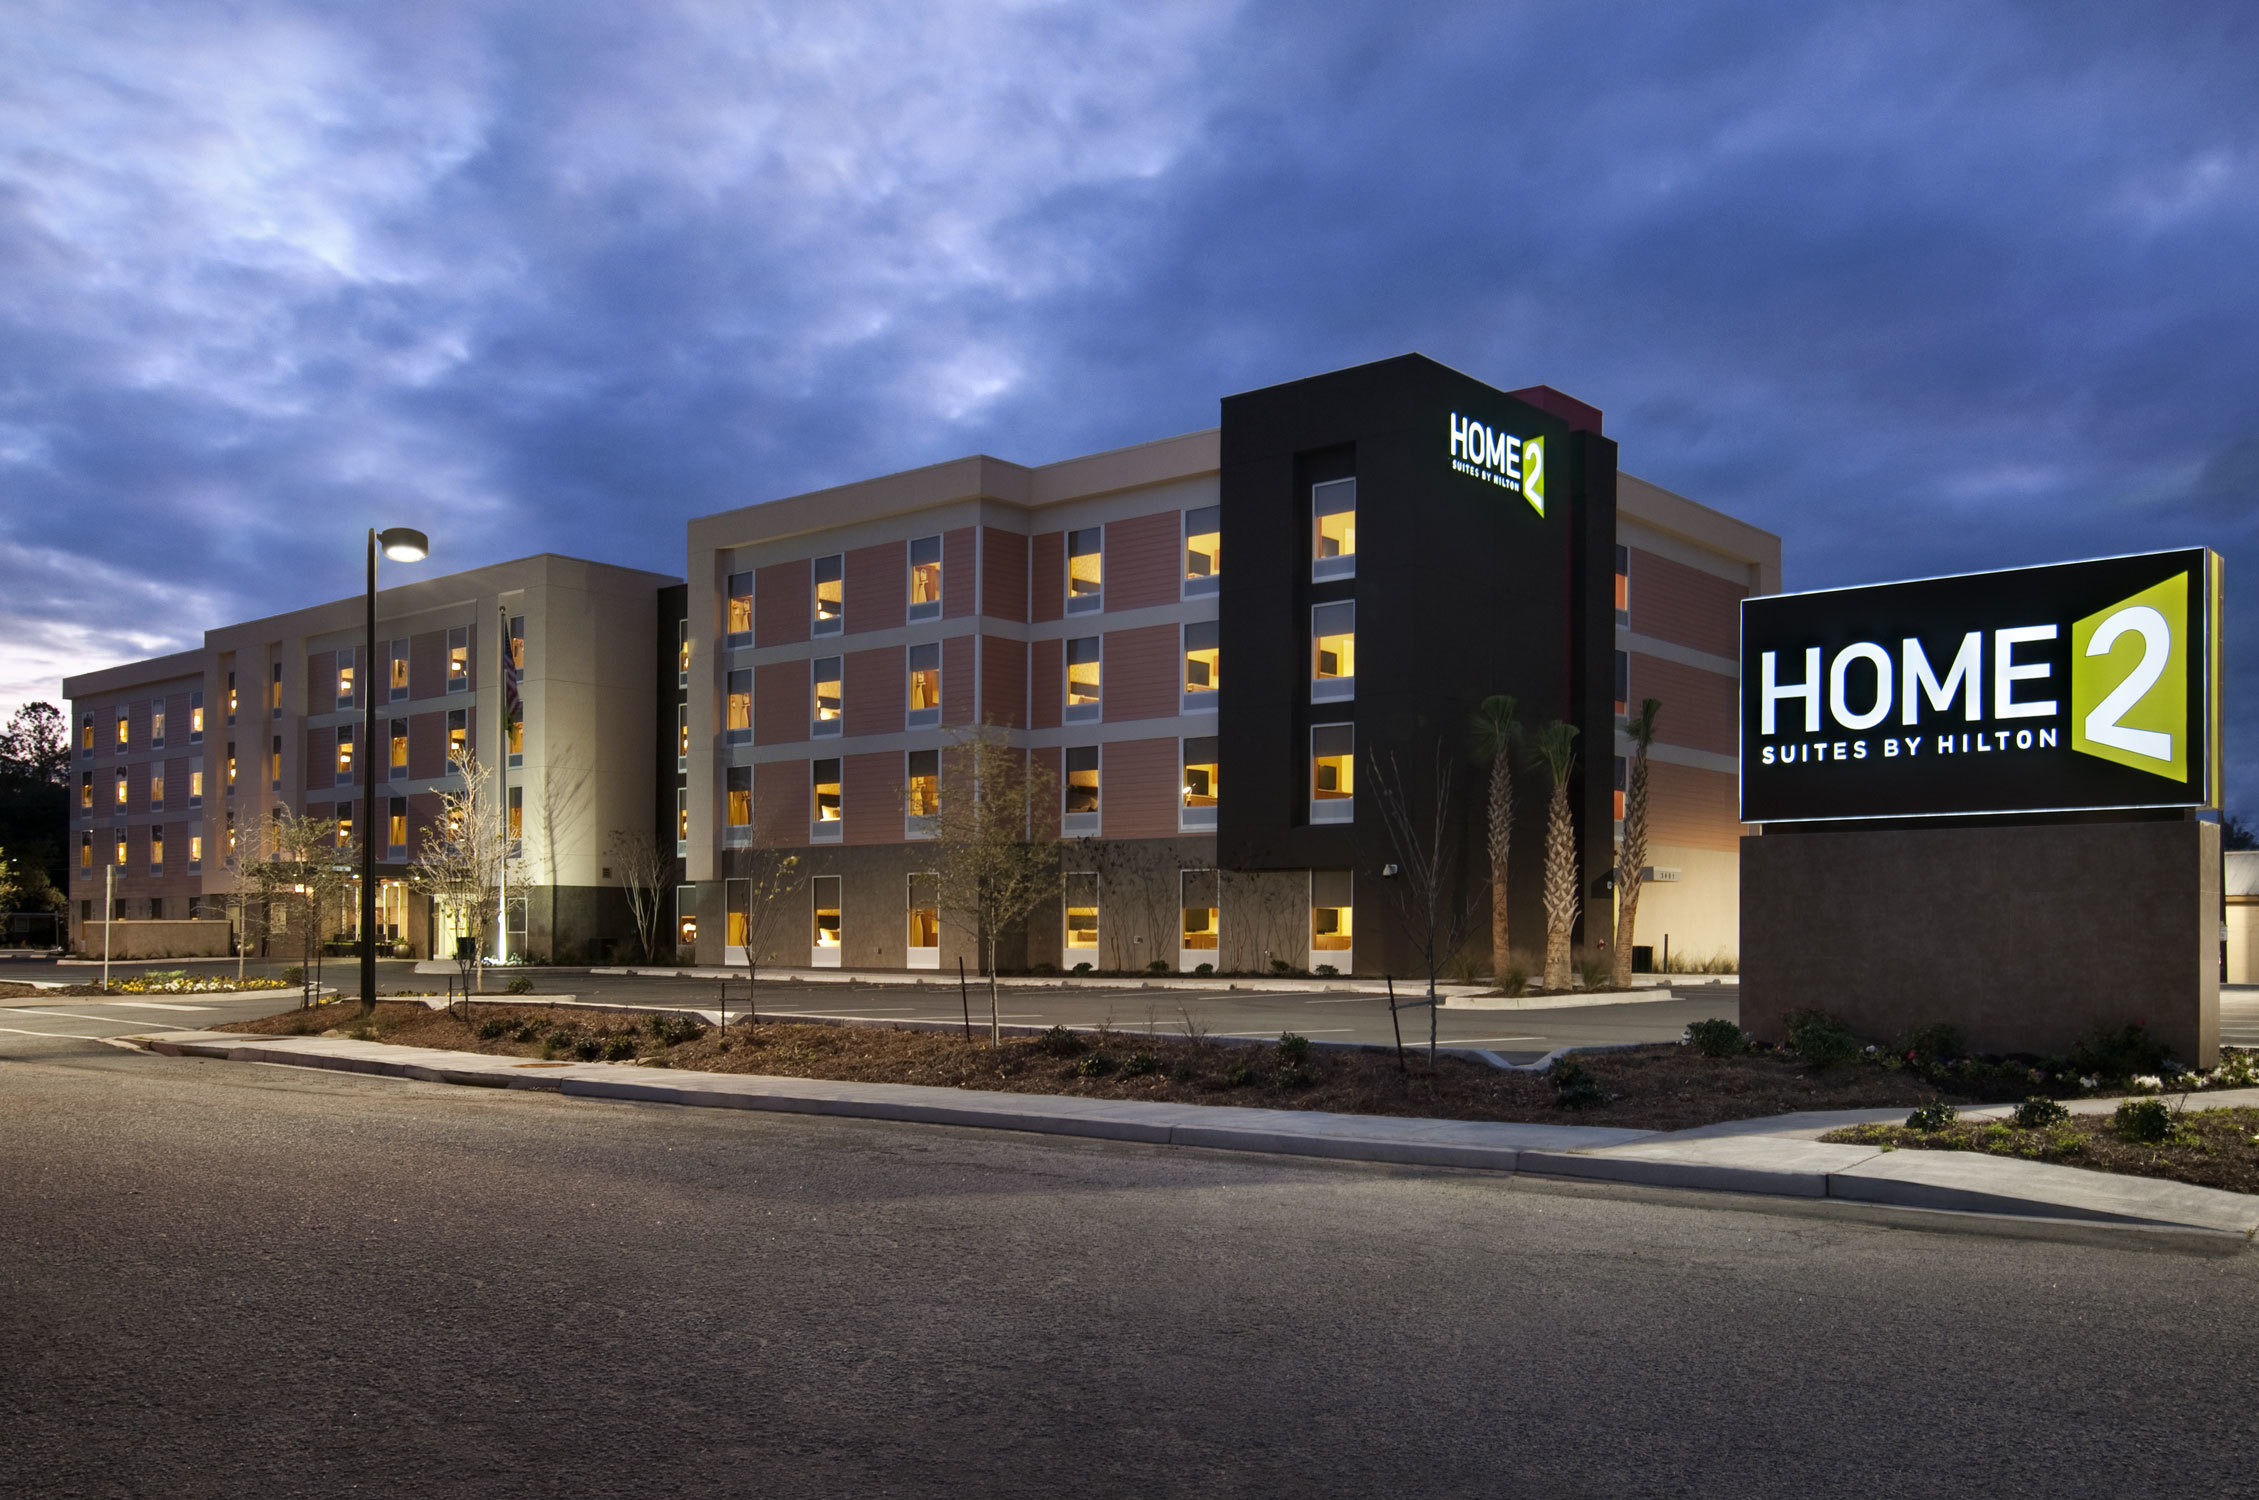 Photo of Home2 Suites by Hilton Charleston Airport/Convention Center, North Charleston, SC